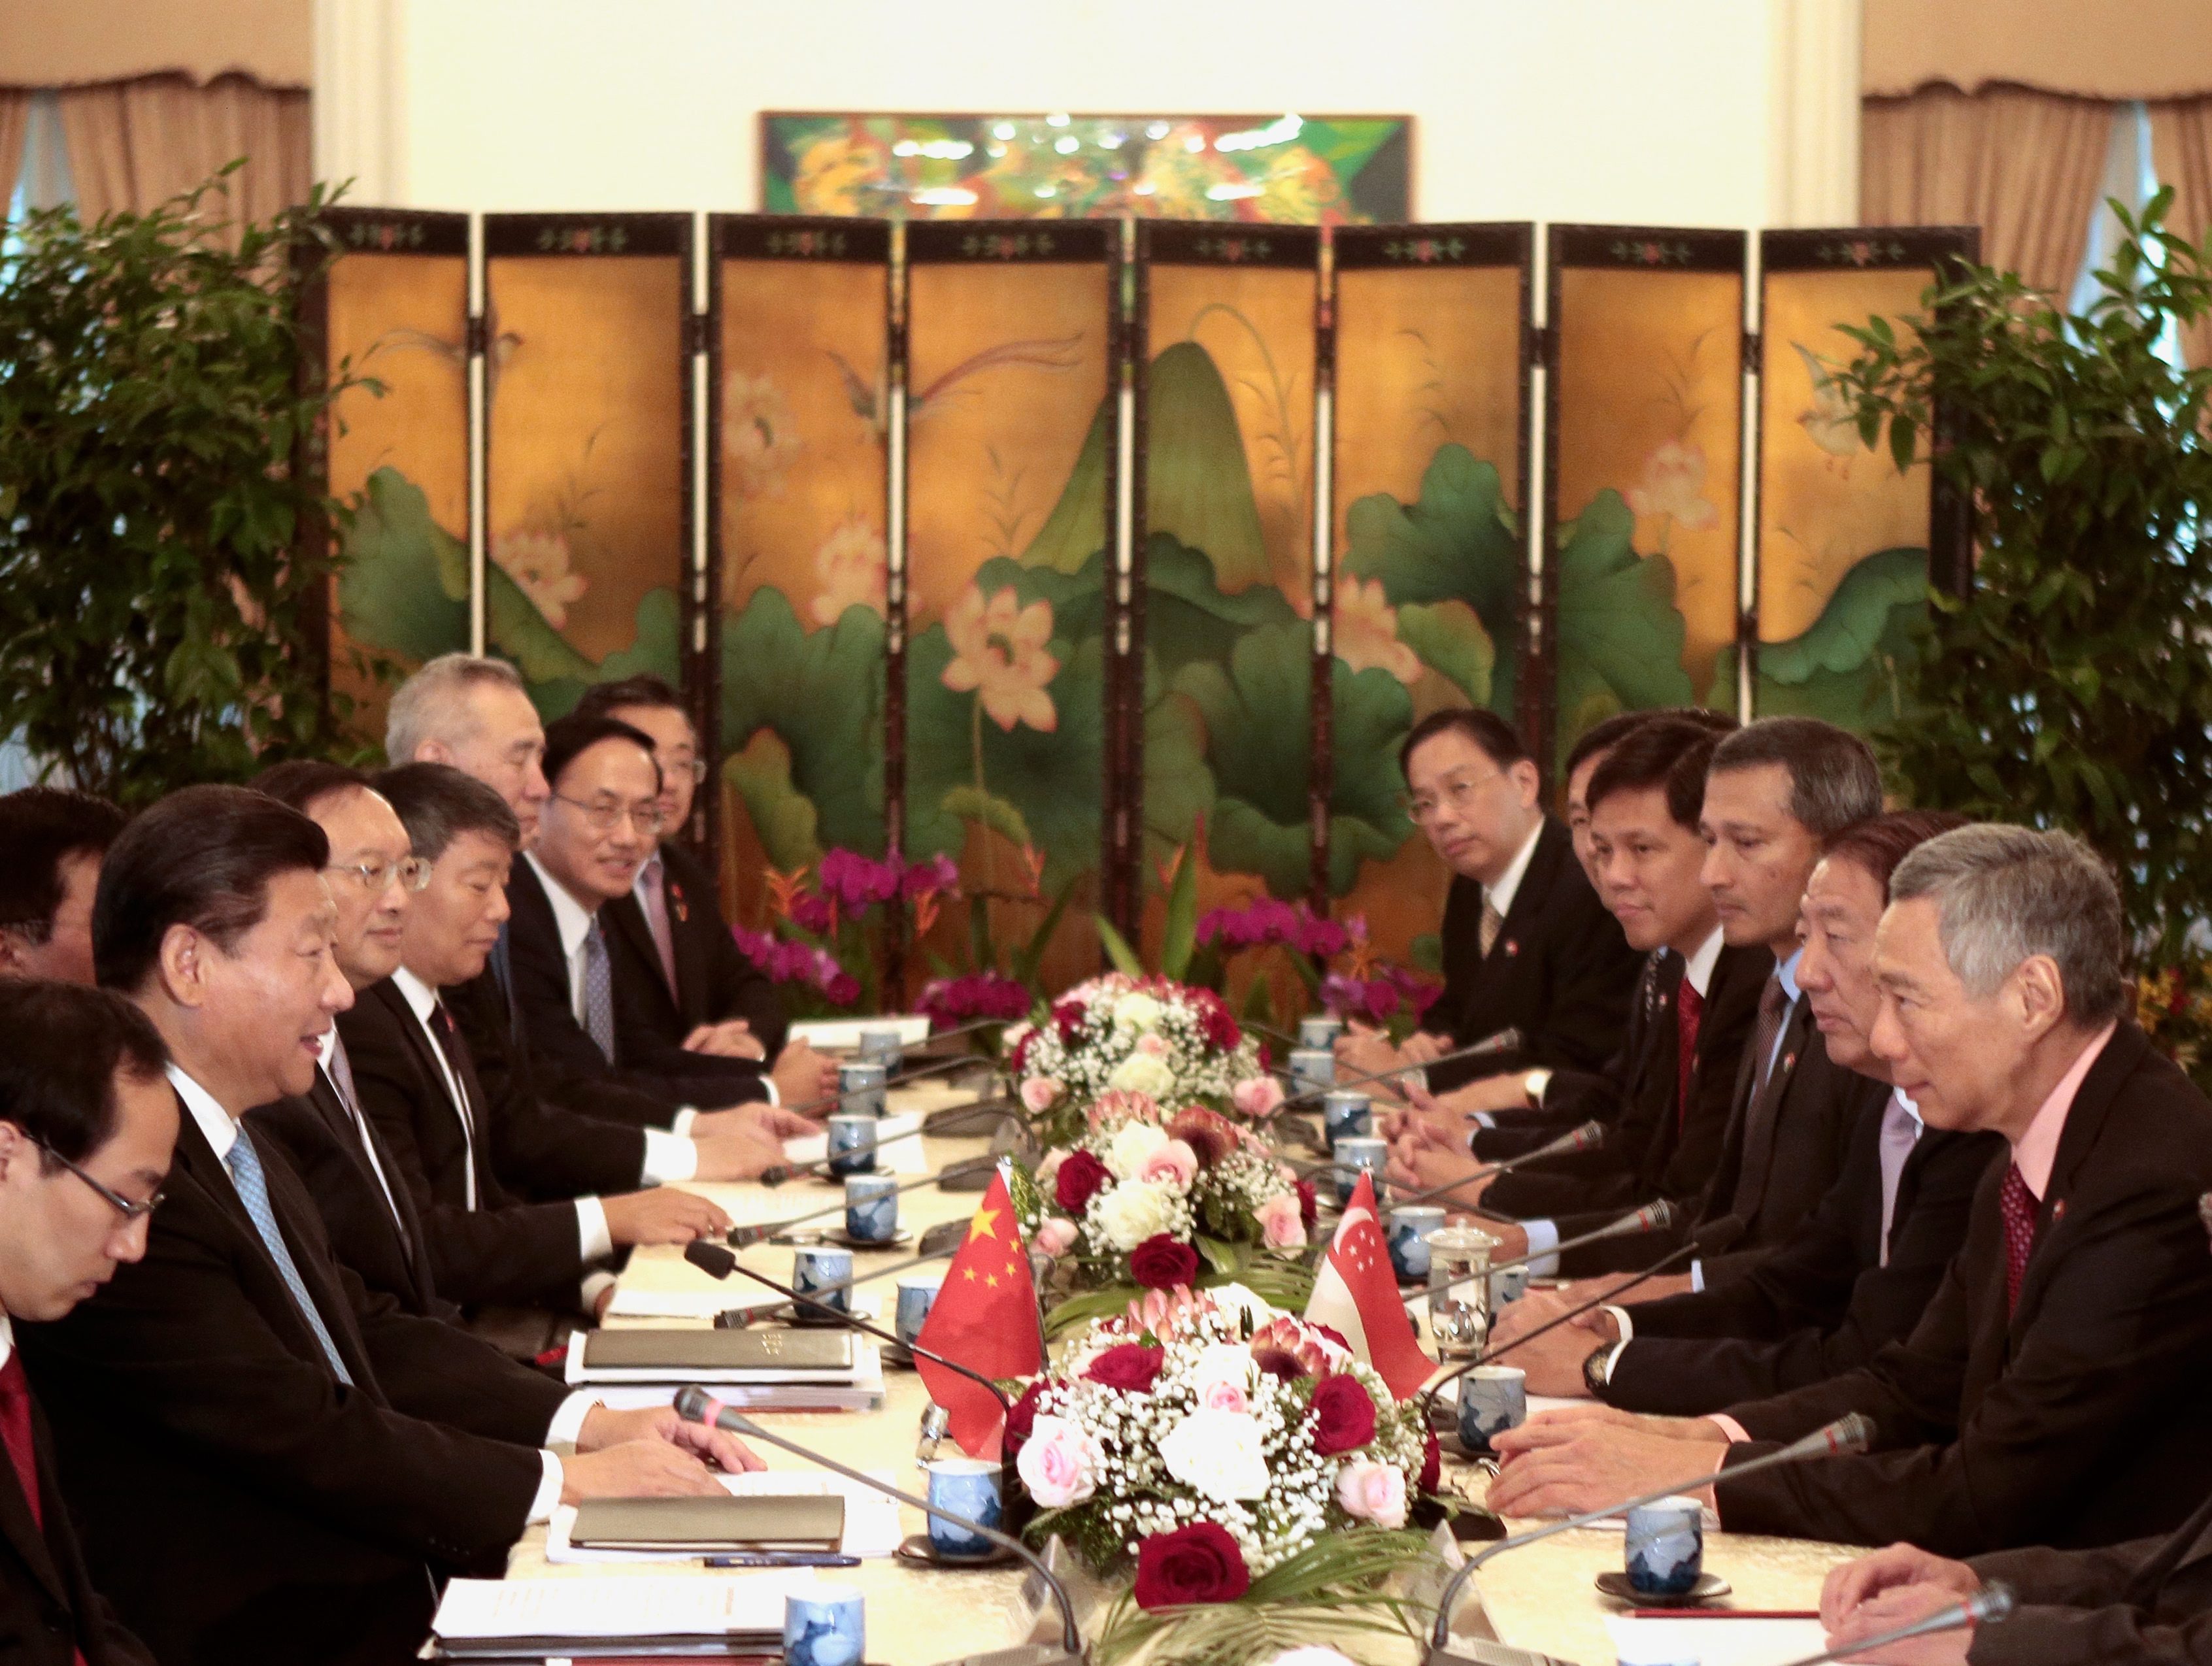 epa05014947 Chinese President Xi Jinping (2-L) and Singapore Prime Minister Lee Hsien Loong (R) and their respective delegations in talks during a meeting at the Istana presidential palace in Singapore, 07 November 2015. Xi's arrival in Singapore for a state visit has been overshadowed by a historic summit with Taiwanese President Ma Ying-Jeou at the weekend, the first time that the leaders of the two countries are meeting. EPA/WALLACE WOON